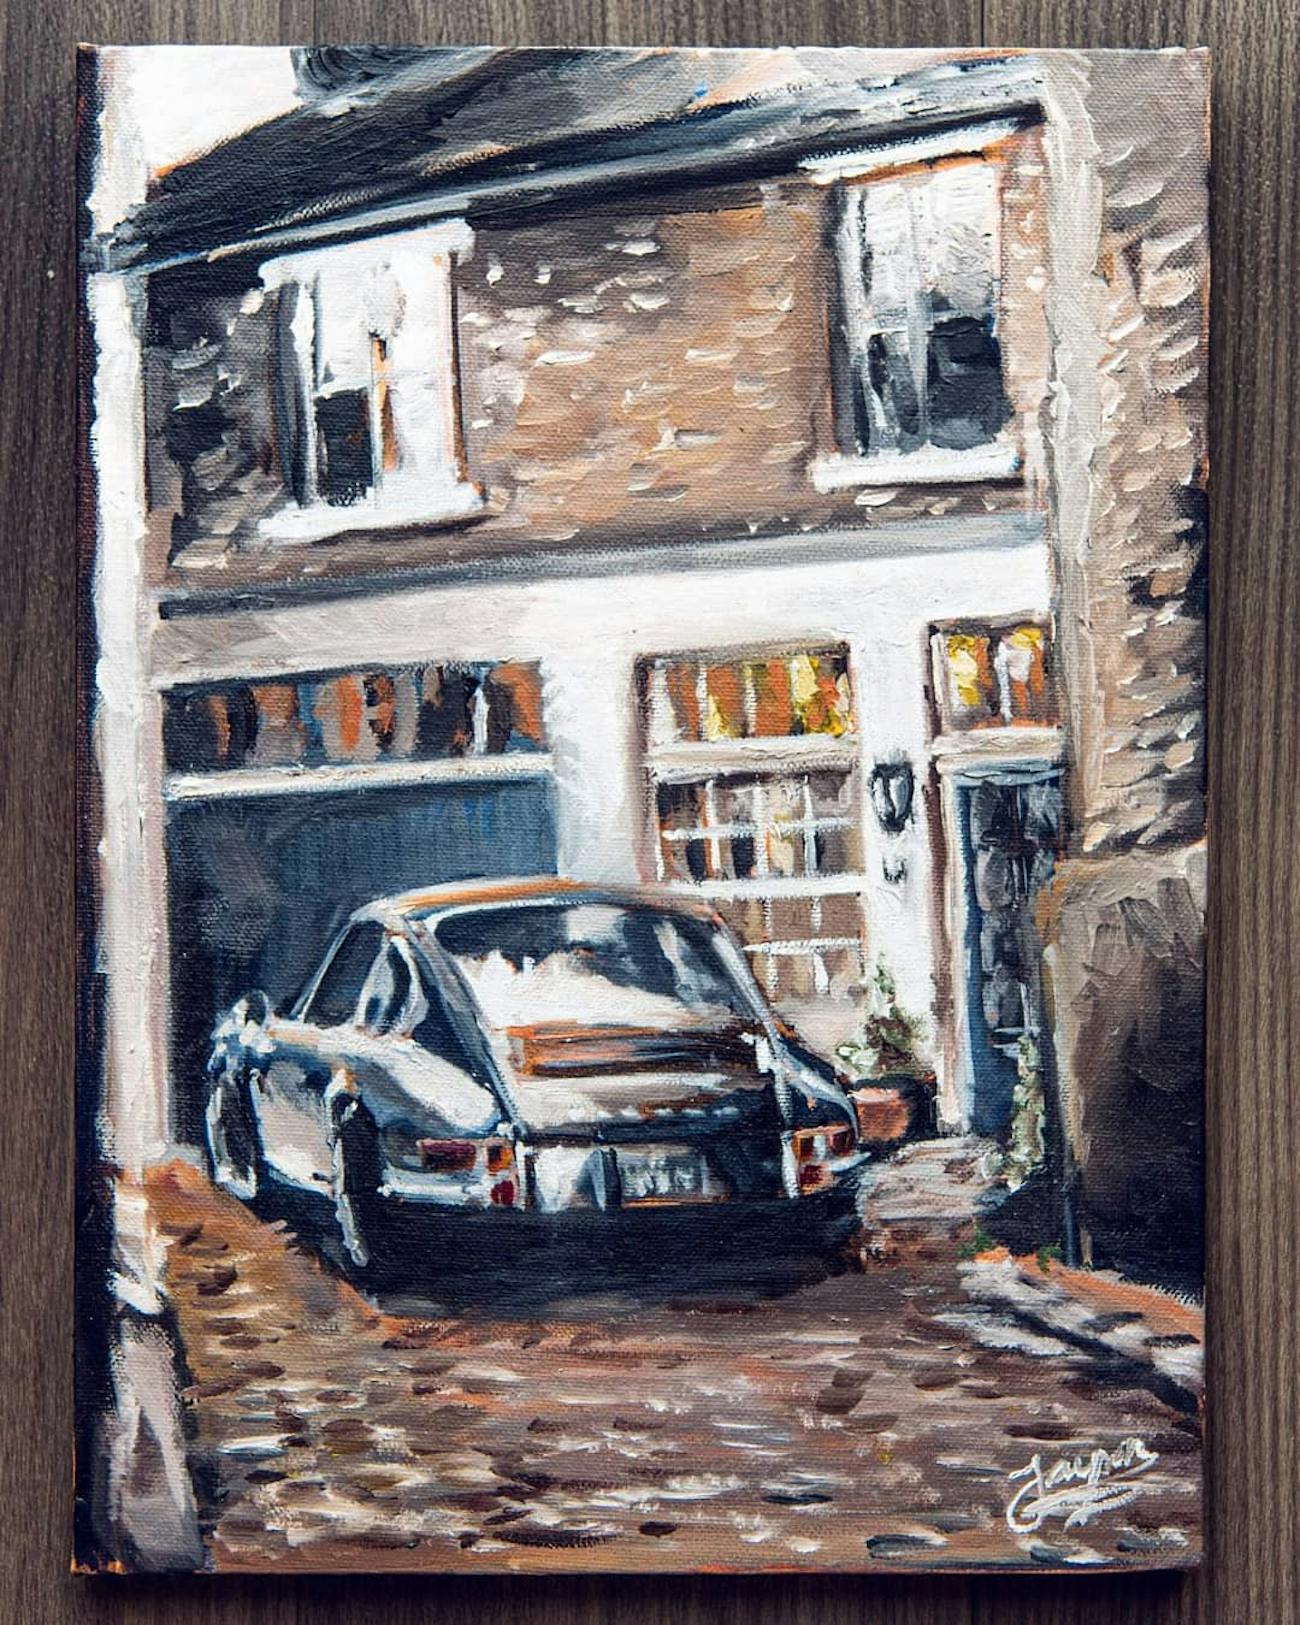 Oil painting of classic Porsche 911 on cobbled street